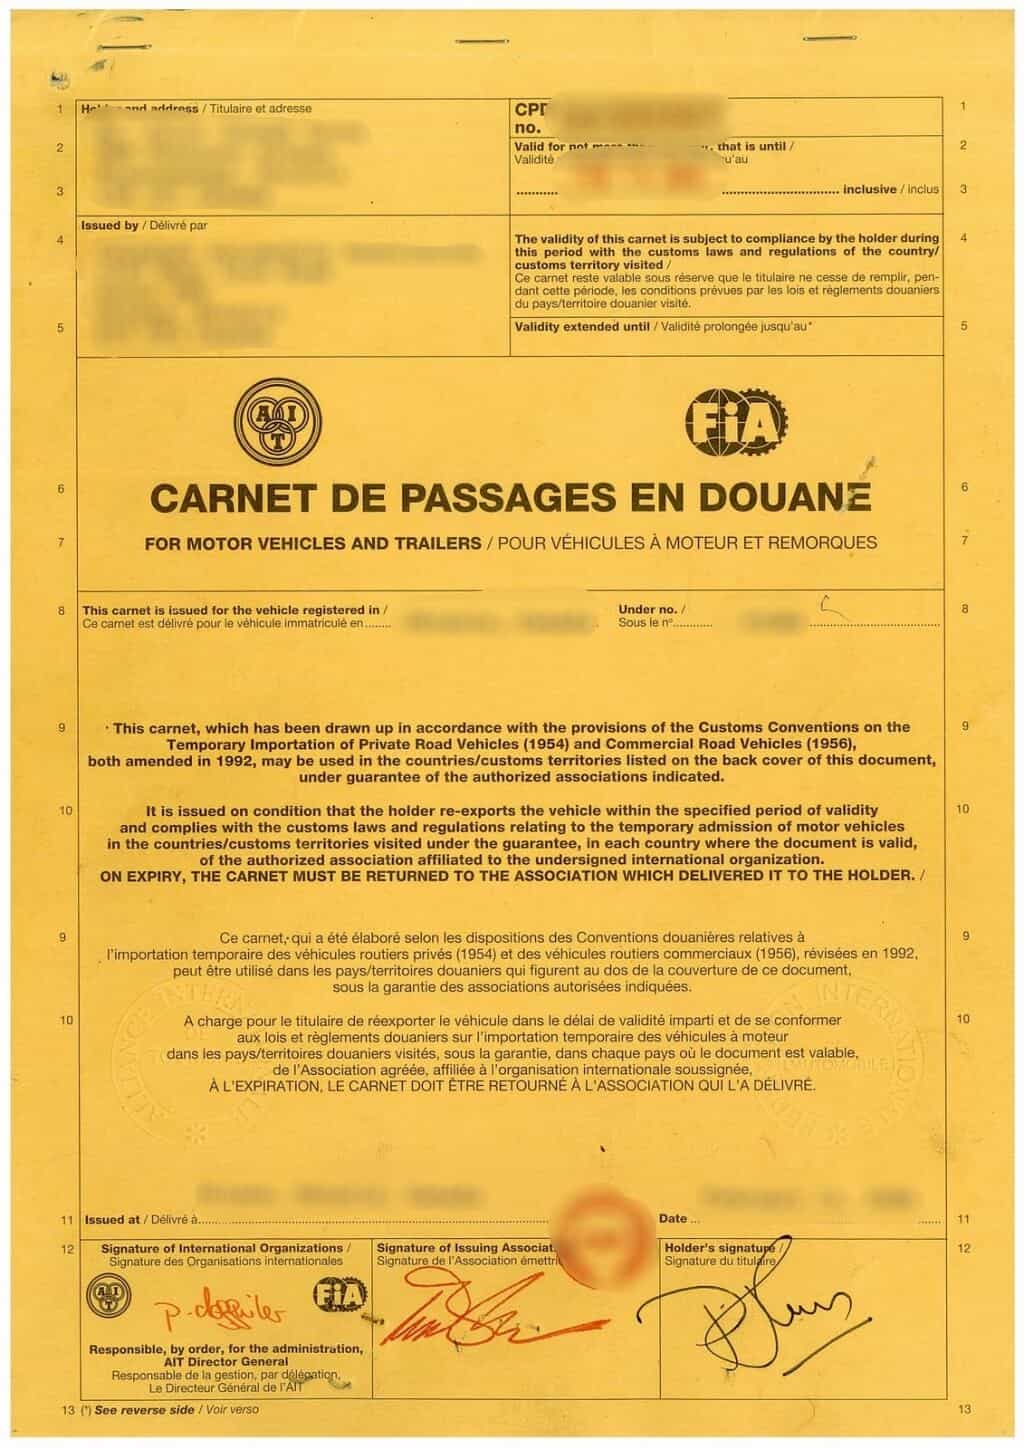 What Does a Carnet Document Look Like? Examples of a Carnet Document